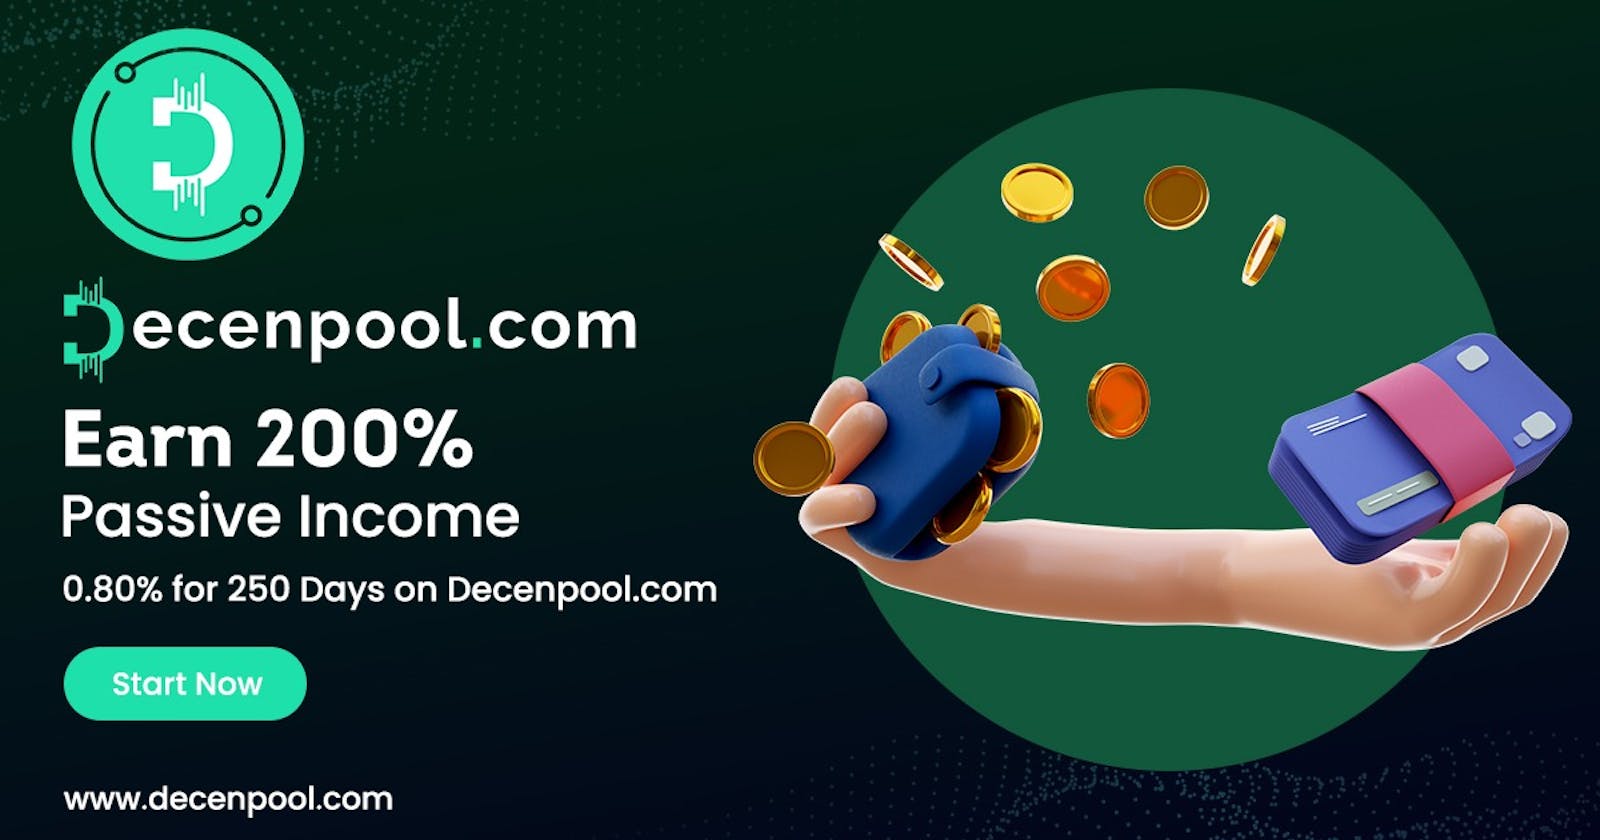 What is DecenPool Passive Earning? Let’s Take a Quick Look!